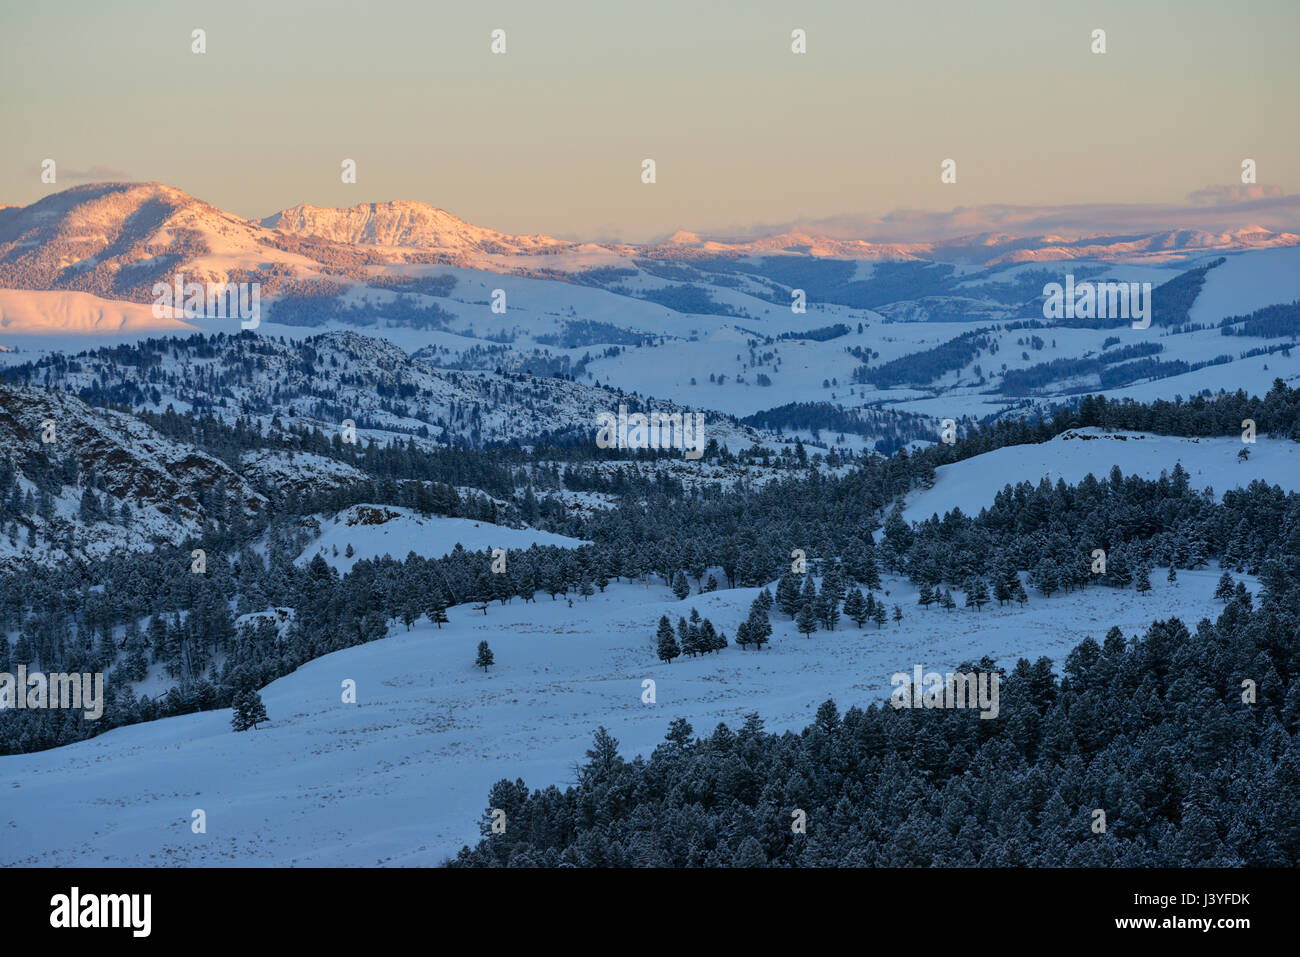 Scenic overview over the wide open valleys of Yellowstone National Park in winter, snow covered hills and mountains in atmospheric last evening light. Stock Photo